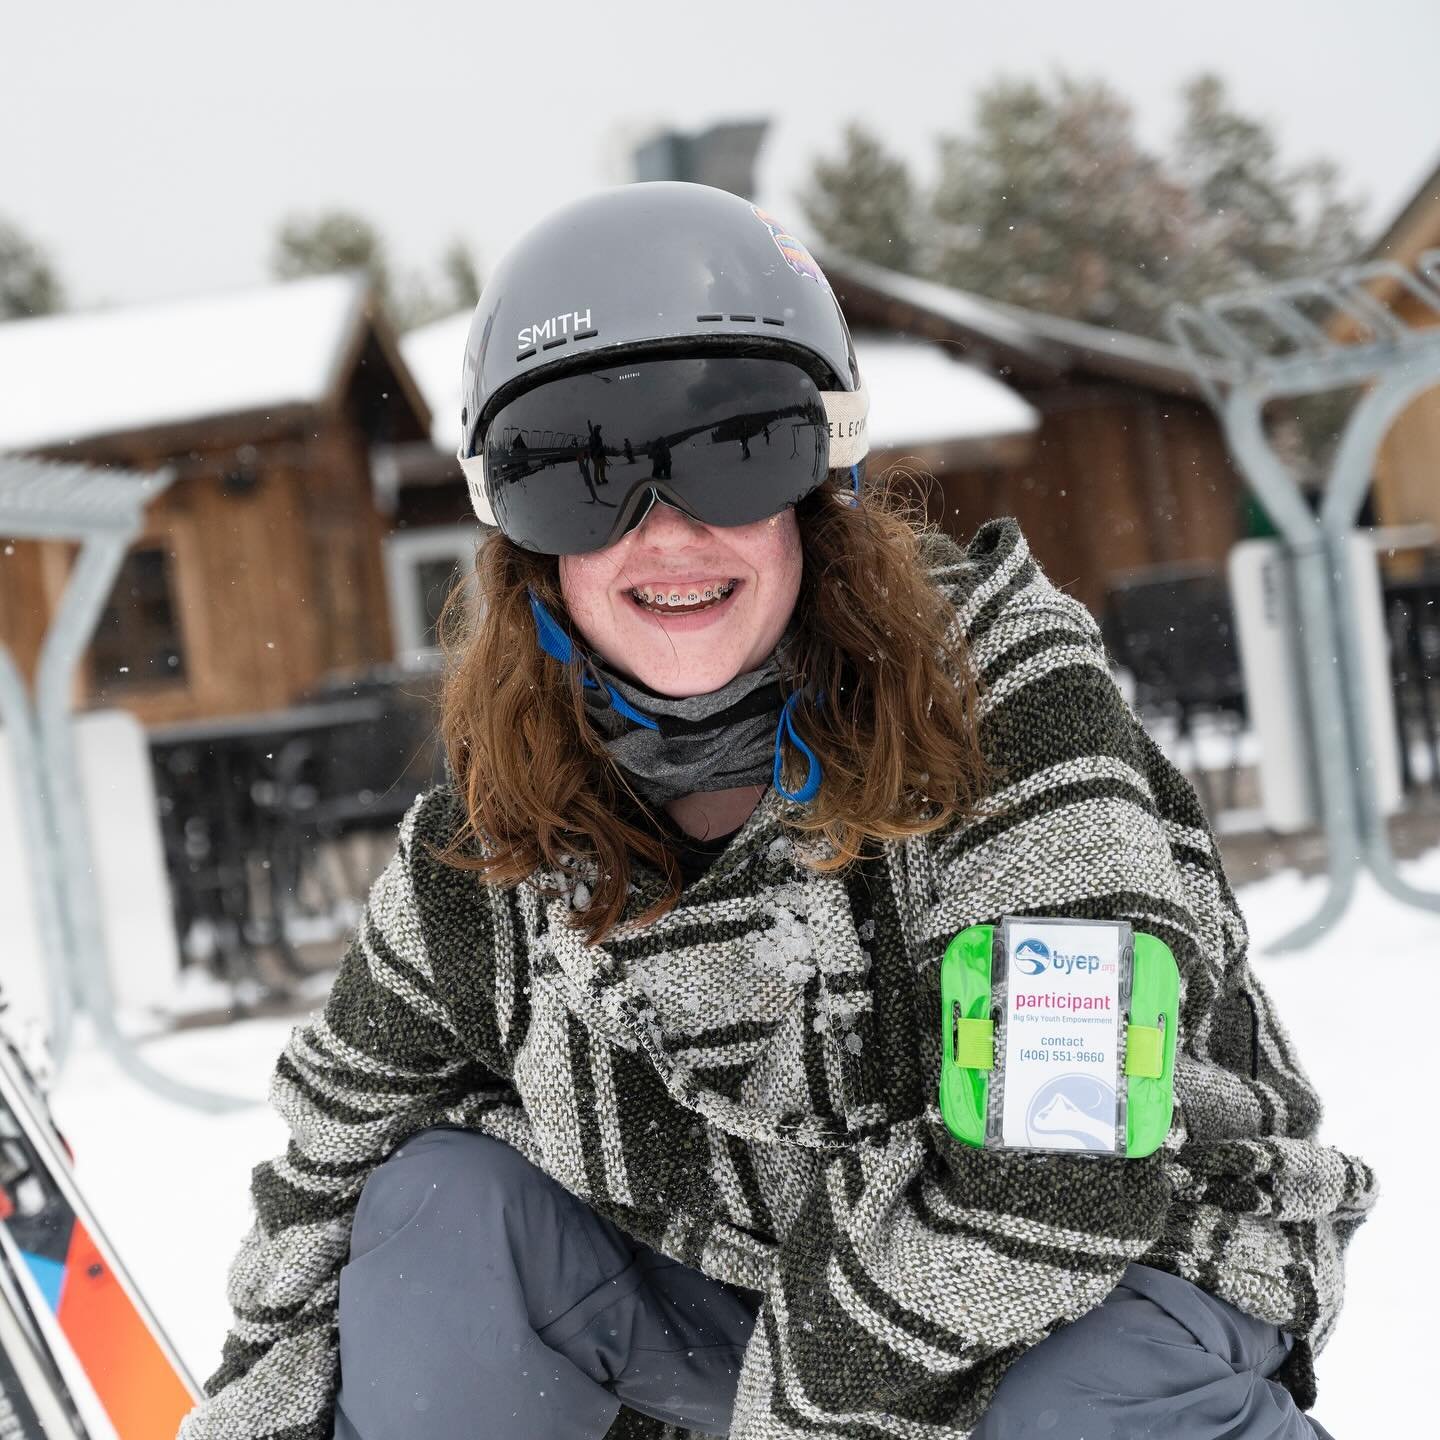 Today is the final day of what has been an incredible winter season! We&rsquo;re so impressed by the growth we&rsquo;ve seen from our teens both on and off the slopes. A big part of the winter season is the challenge for our teens to learn, or improv